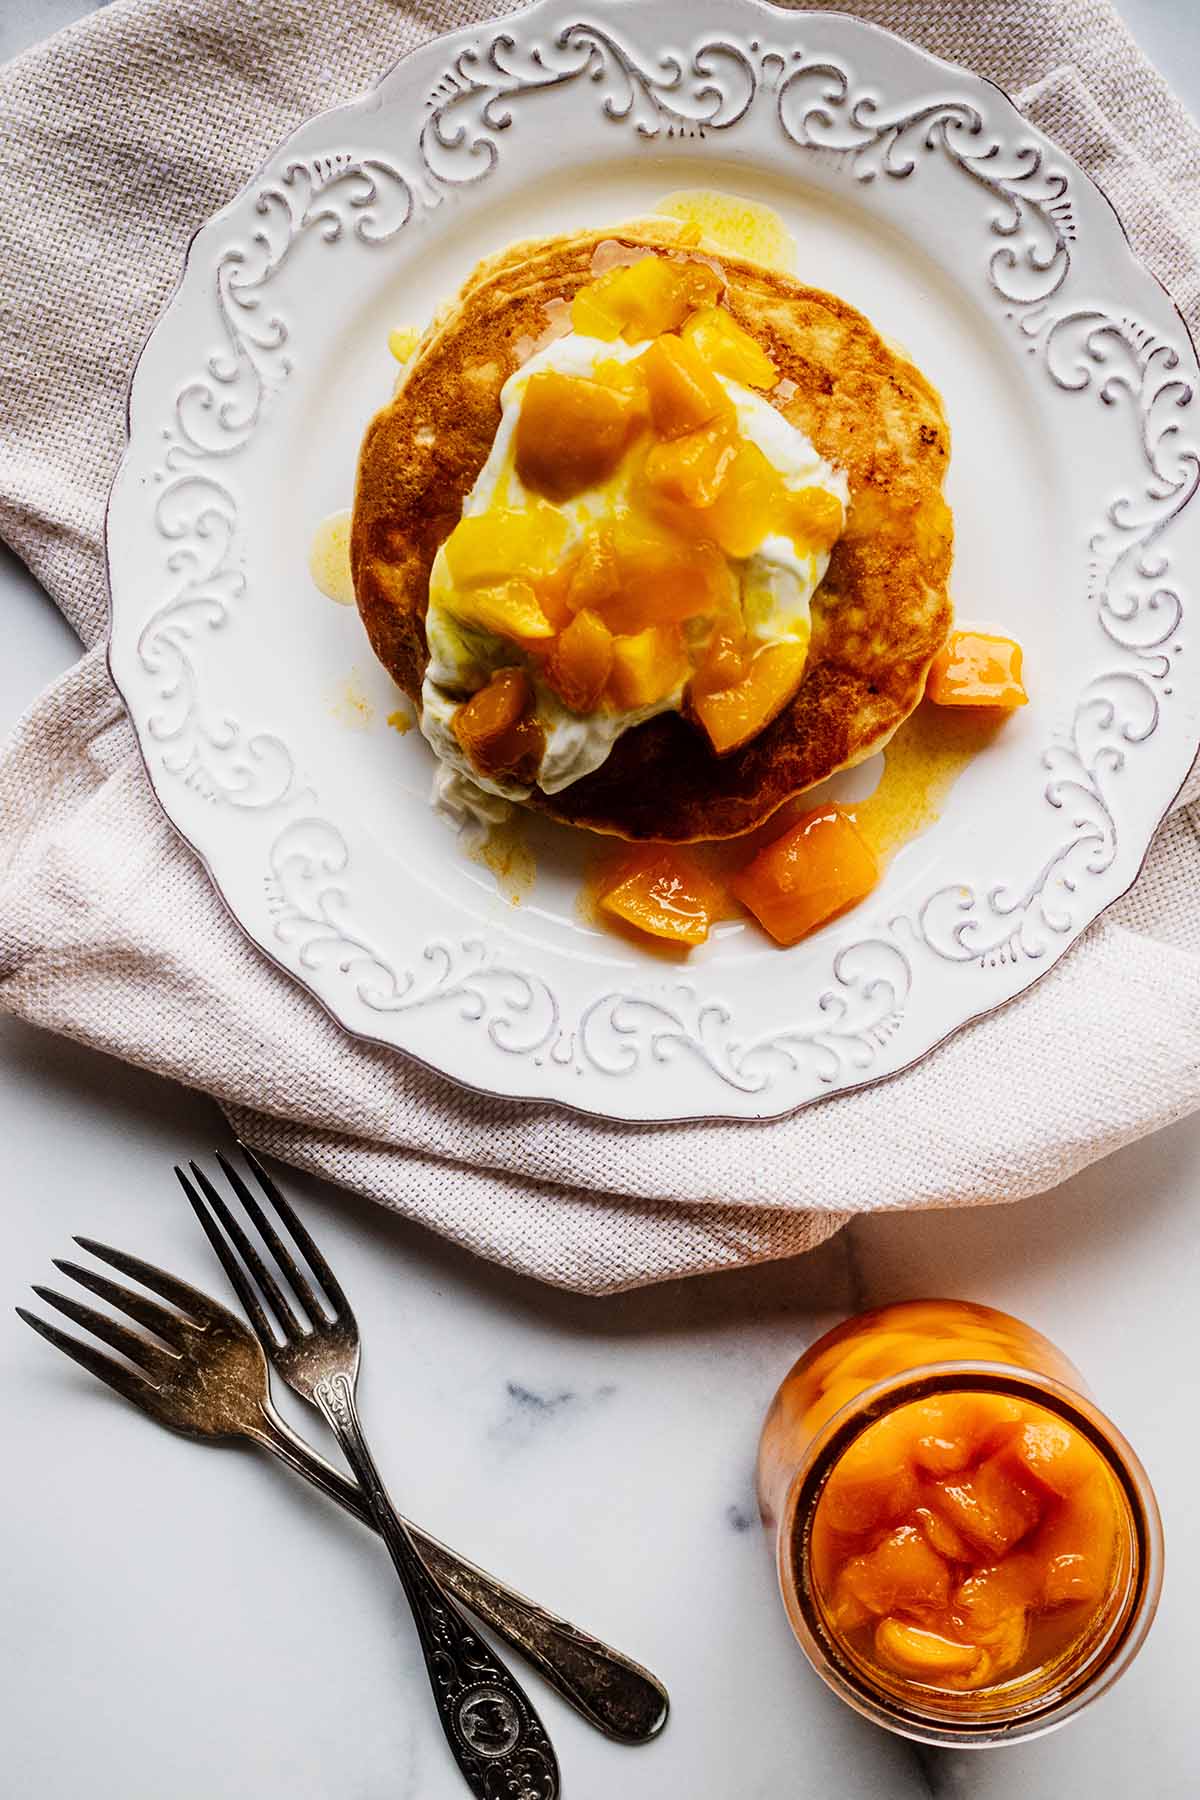 Overhead view of mango pancakes topped with yogurt and mango compote on a white plate on a muslin napkin. Two forks and a glass jar of mango compote are off to the side.